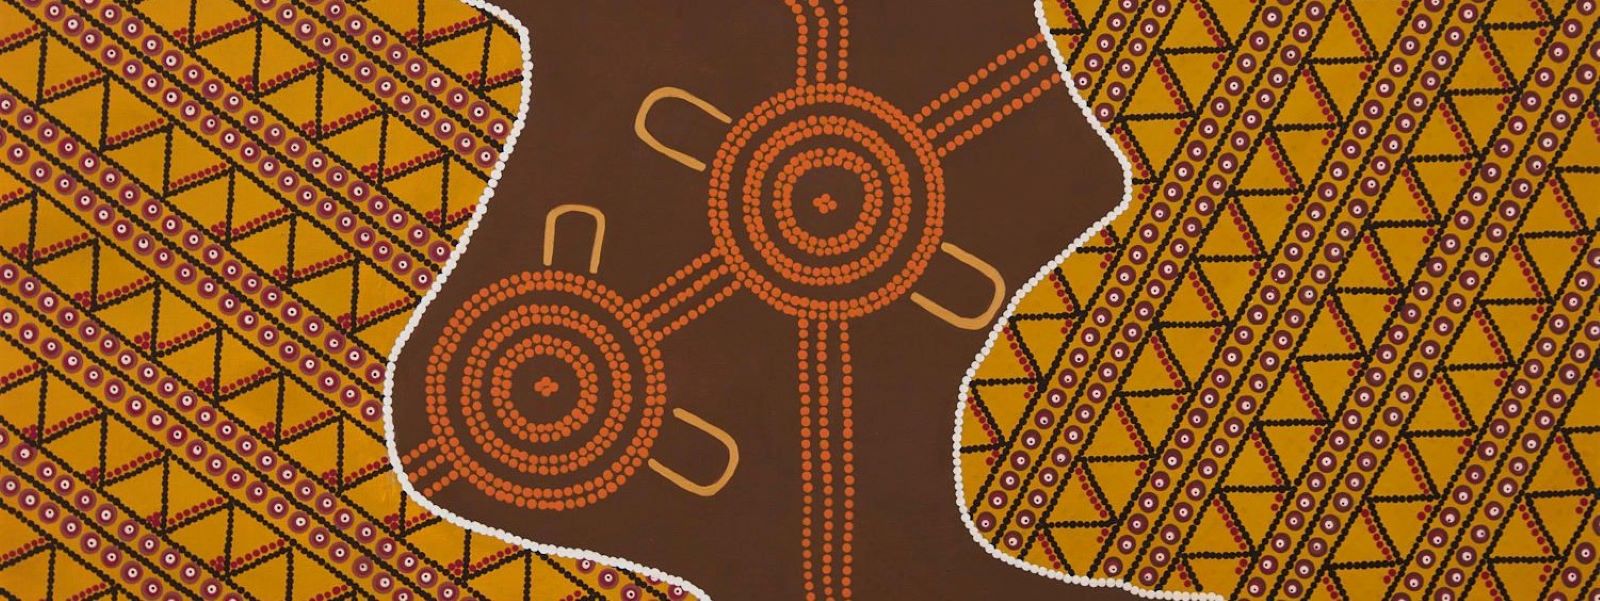 Orange, yellow and brown Aboriginal art patters strike and flow through the image. 